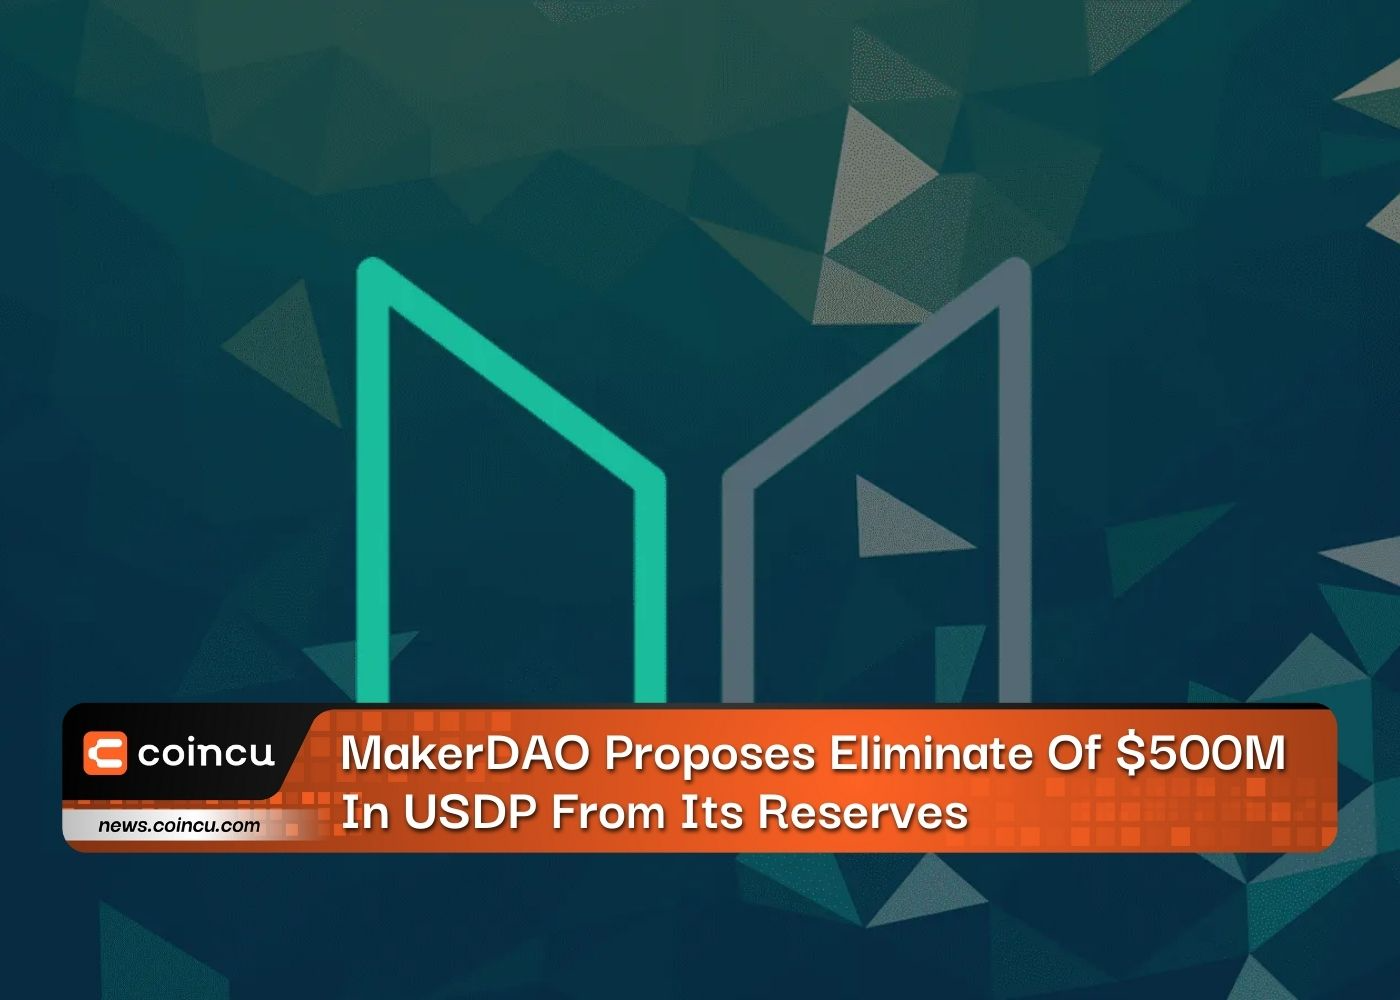 MakerDAO Proposes Eliminate Of $500M In USDP From Its Reserves